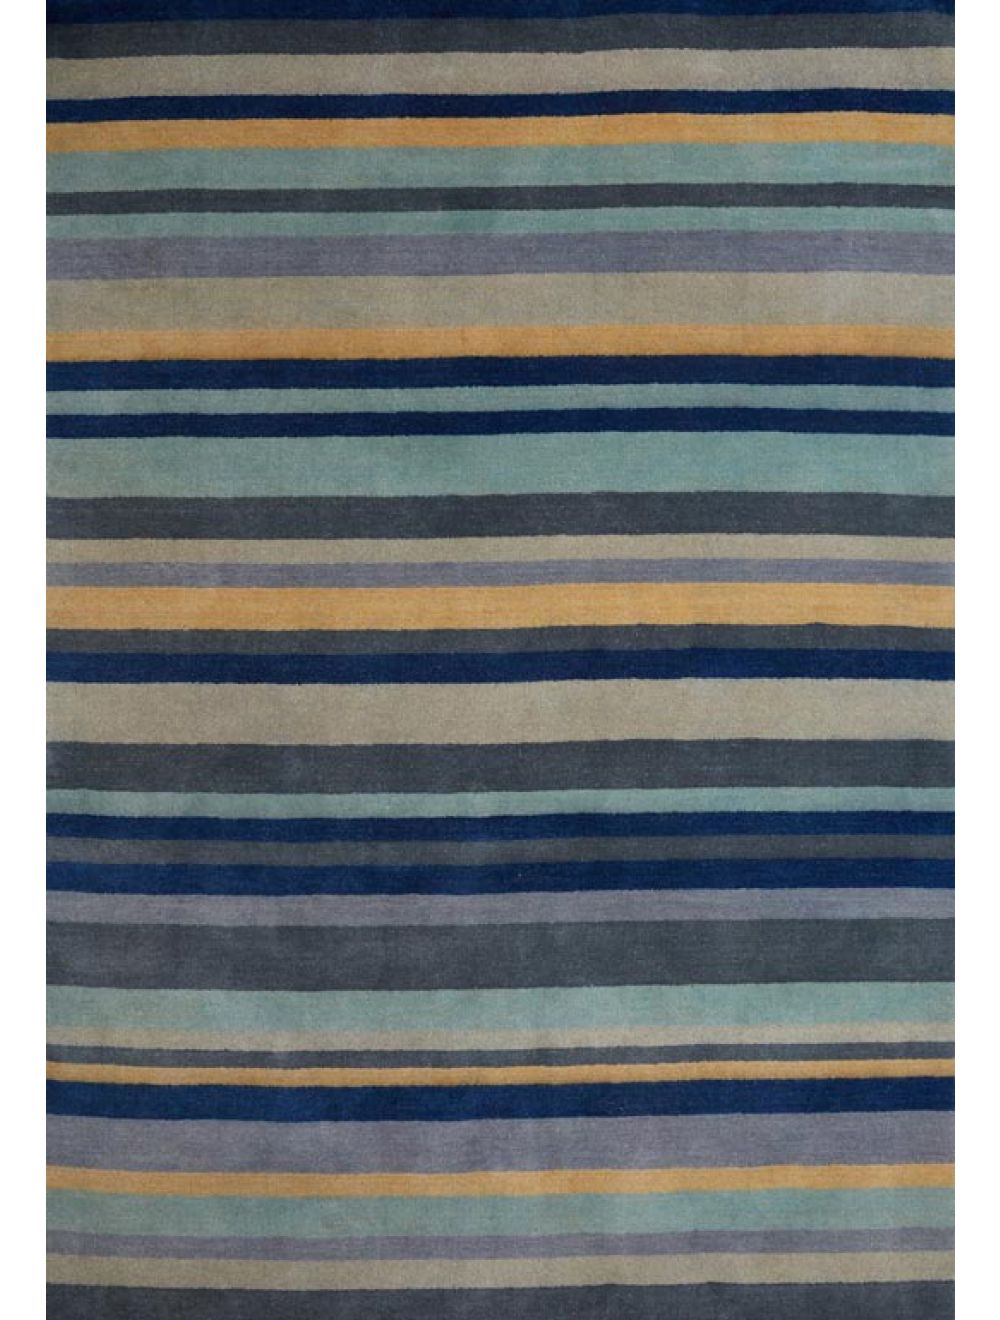 Ainslie 03 Stripe Rugs In Blue Yellow, Blue And Yellow Rugs Uk